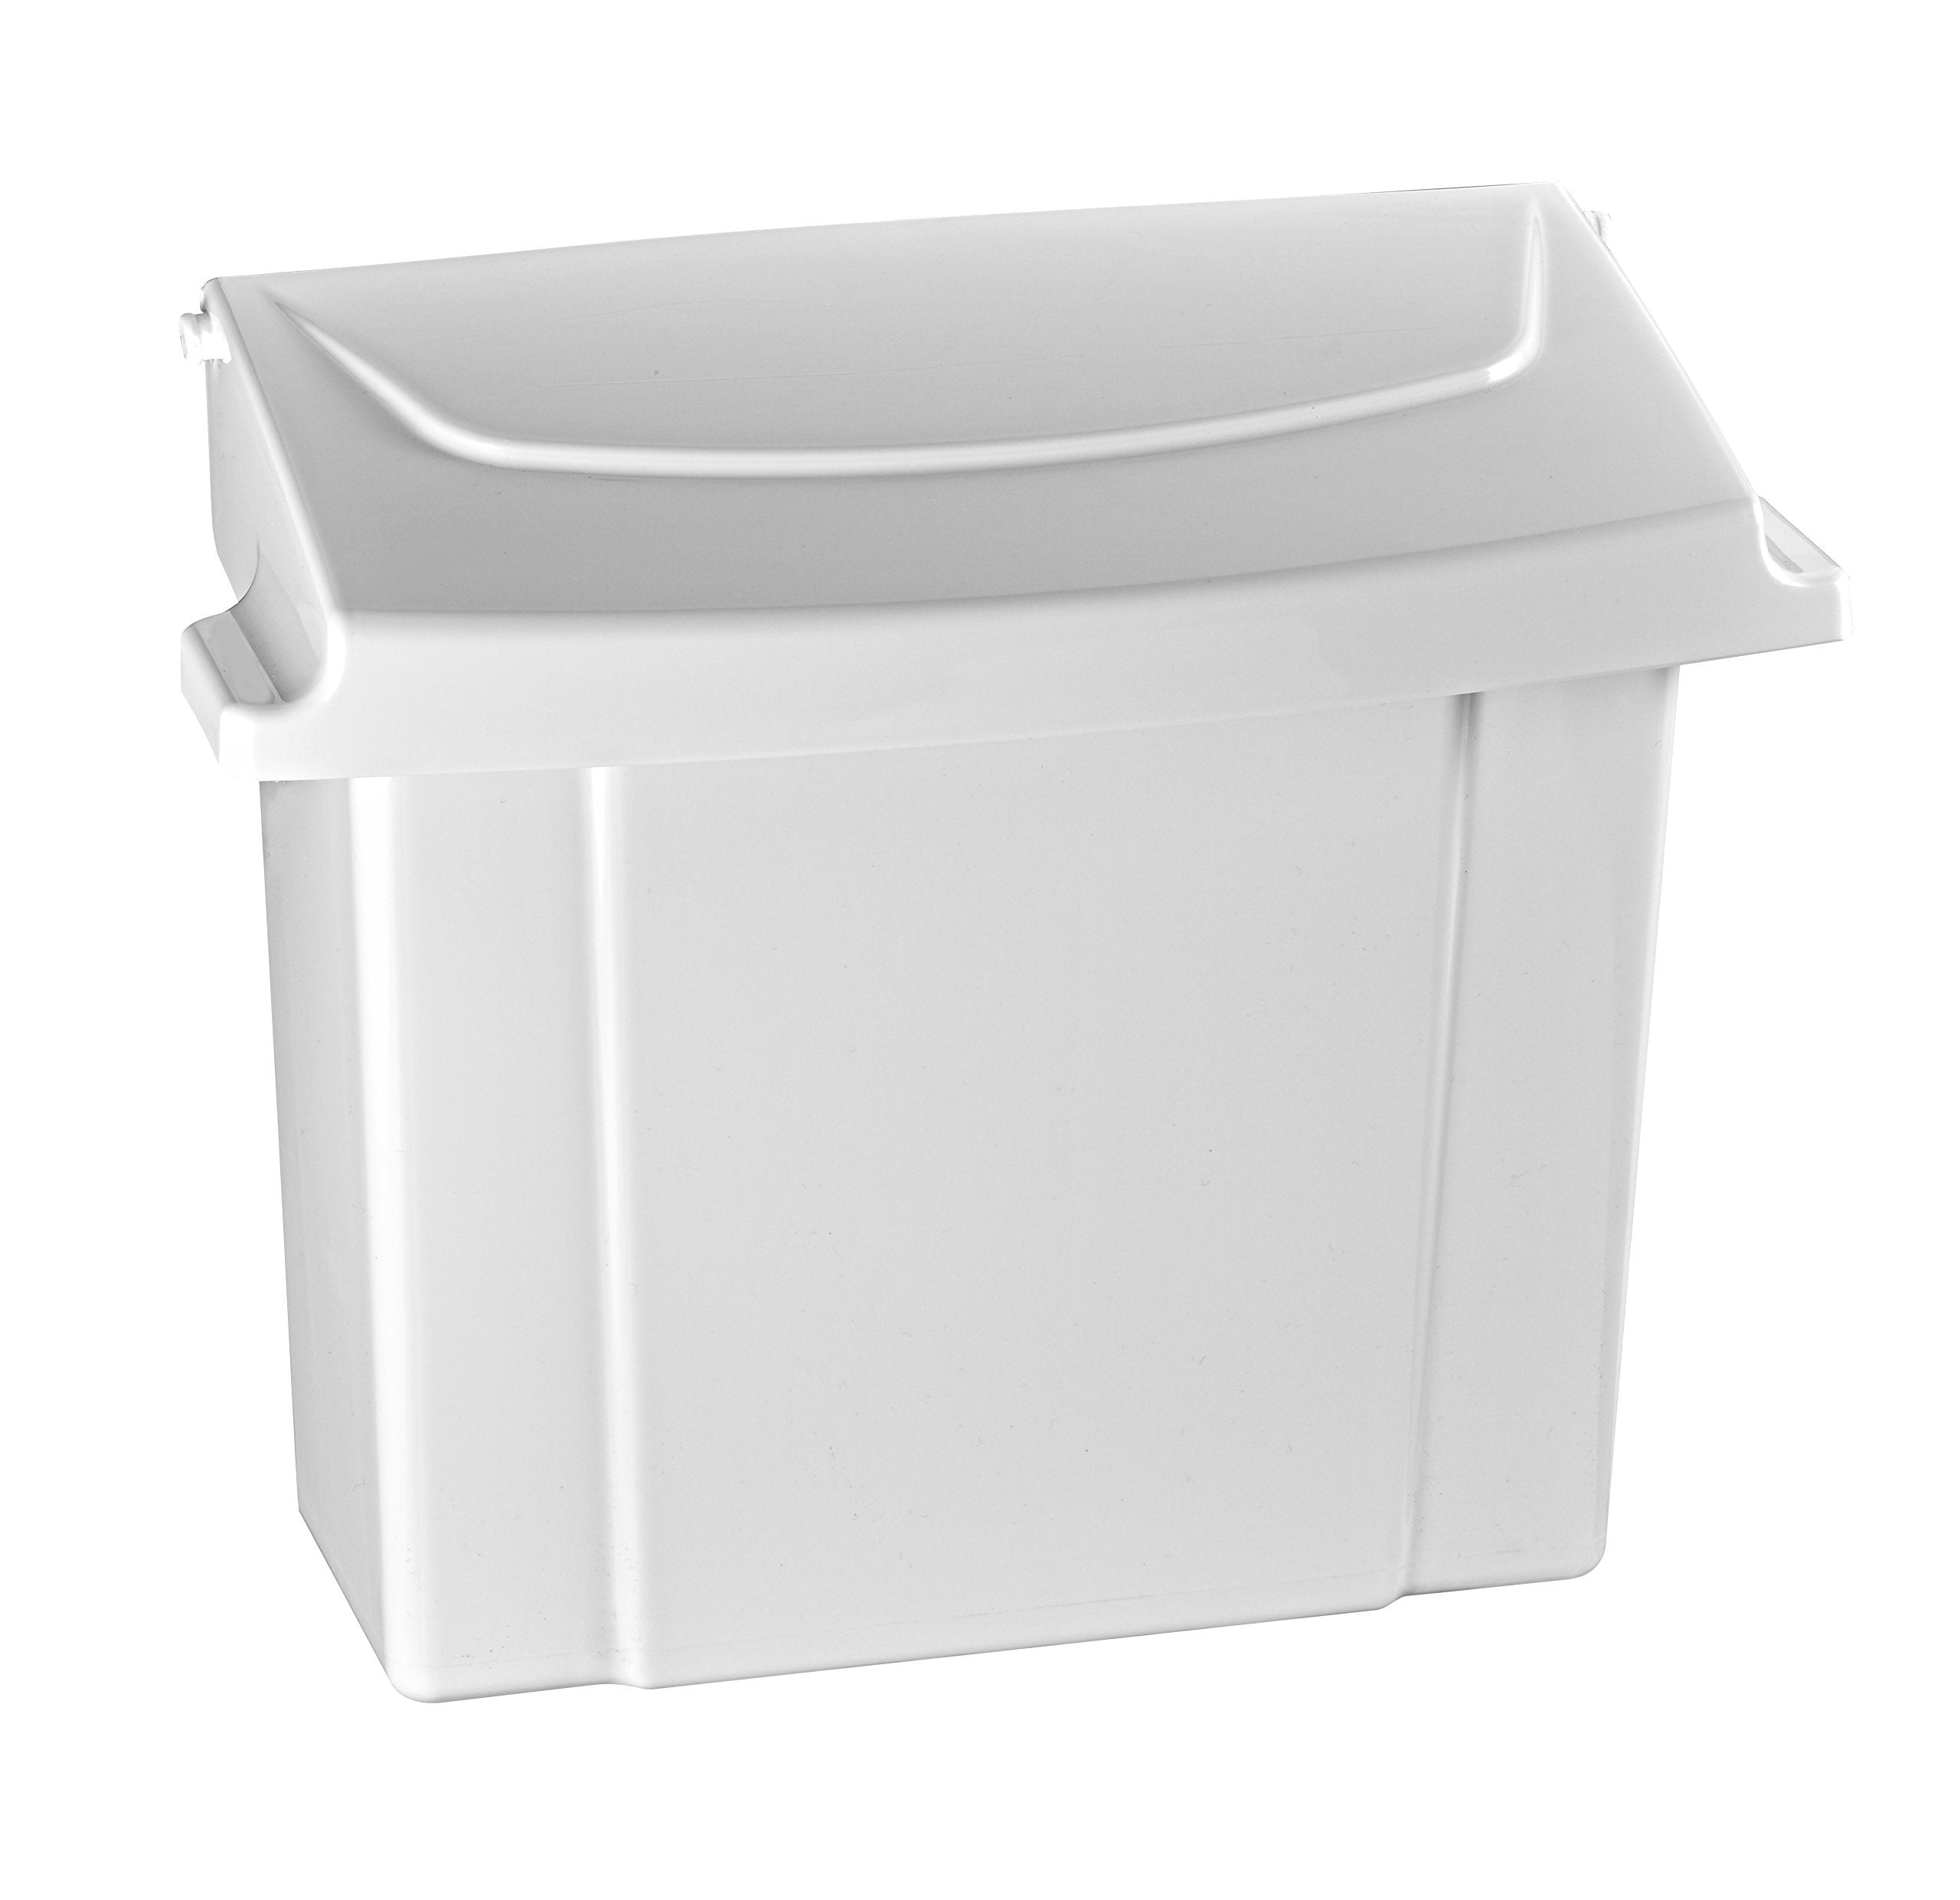 Alpine Sanitary Napkins Receptacle - Hygiene Products, Tampon & Waste Disposal Container - Durable ABS Plastic - Seals Tightly & Traps Odors -Easy Installation Hardware Included (White)